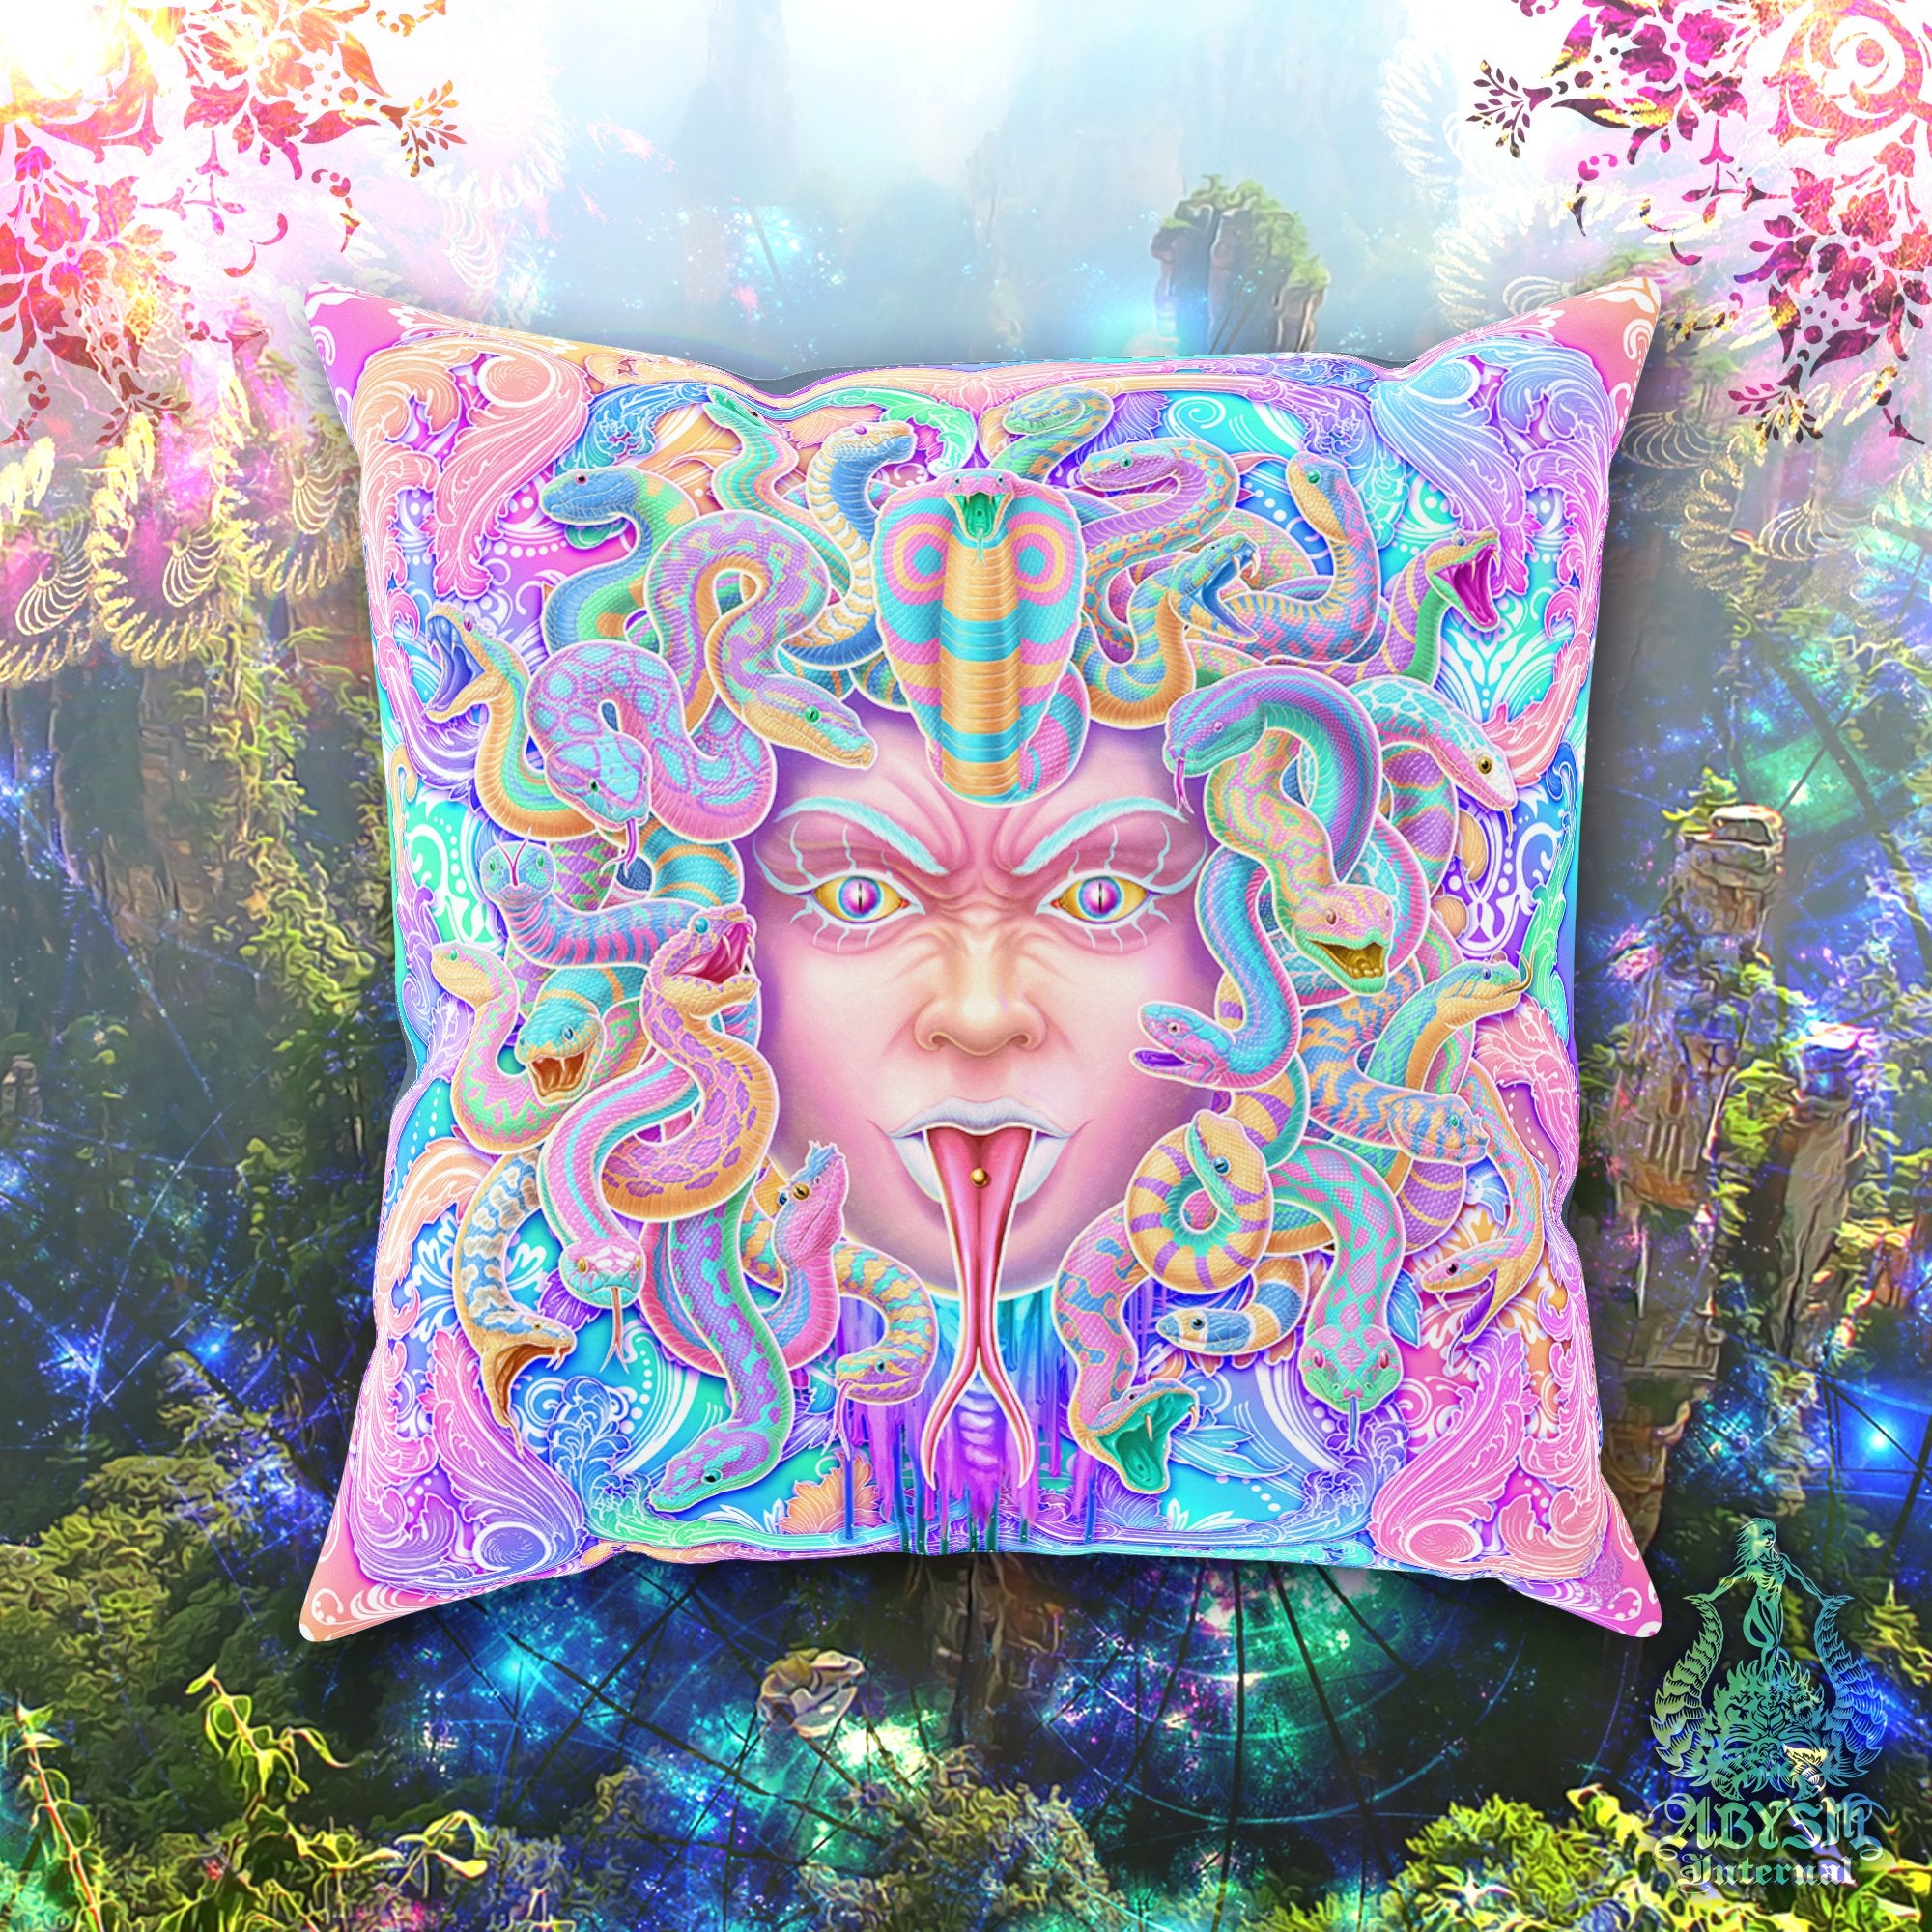 Pastel Skull Throw Pillow, Decorative Accent Pillow, Square Cushion Cover, Aesthetic Room Decor, Psychedelic Art, Funky Home - Medusa, 4 Faces - Abysm Internal